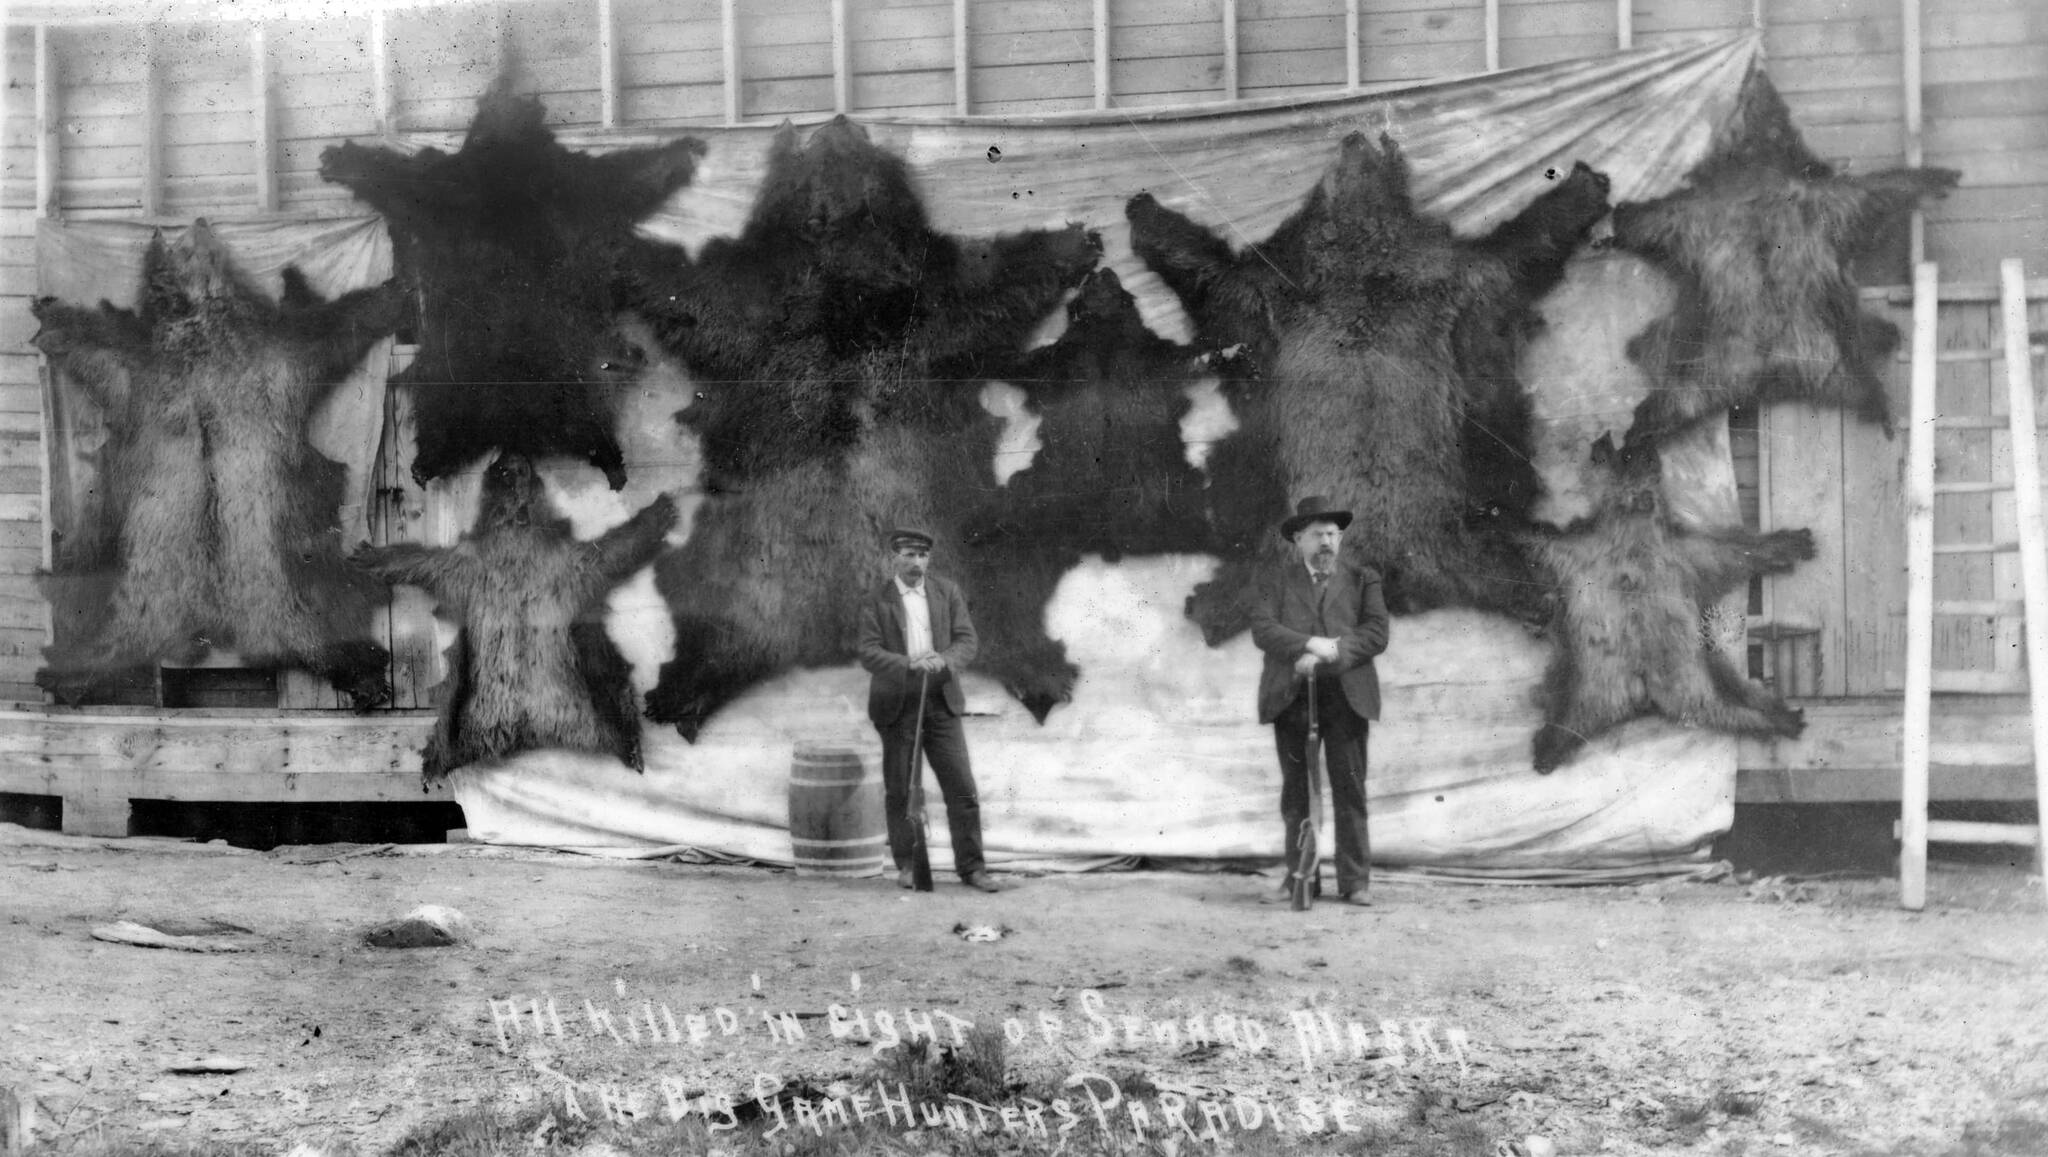 Photo #940.1.5 courtesy of the Resurrection Bay Historical Society
Dr. John Baughman (R) and an unidentified man (possibly W.H. Case) pose in about 1910 before a display of eight bear skins. Written on the photo: “All killed in sight of Seward, Alaska. The big game hunters paradise.”